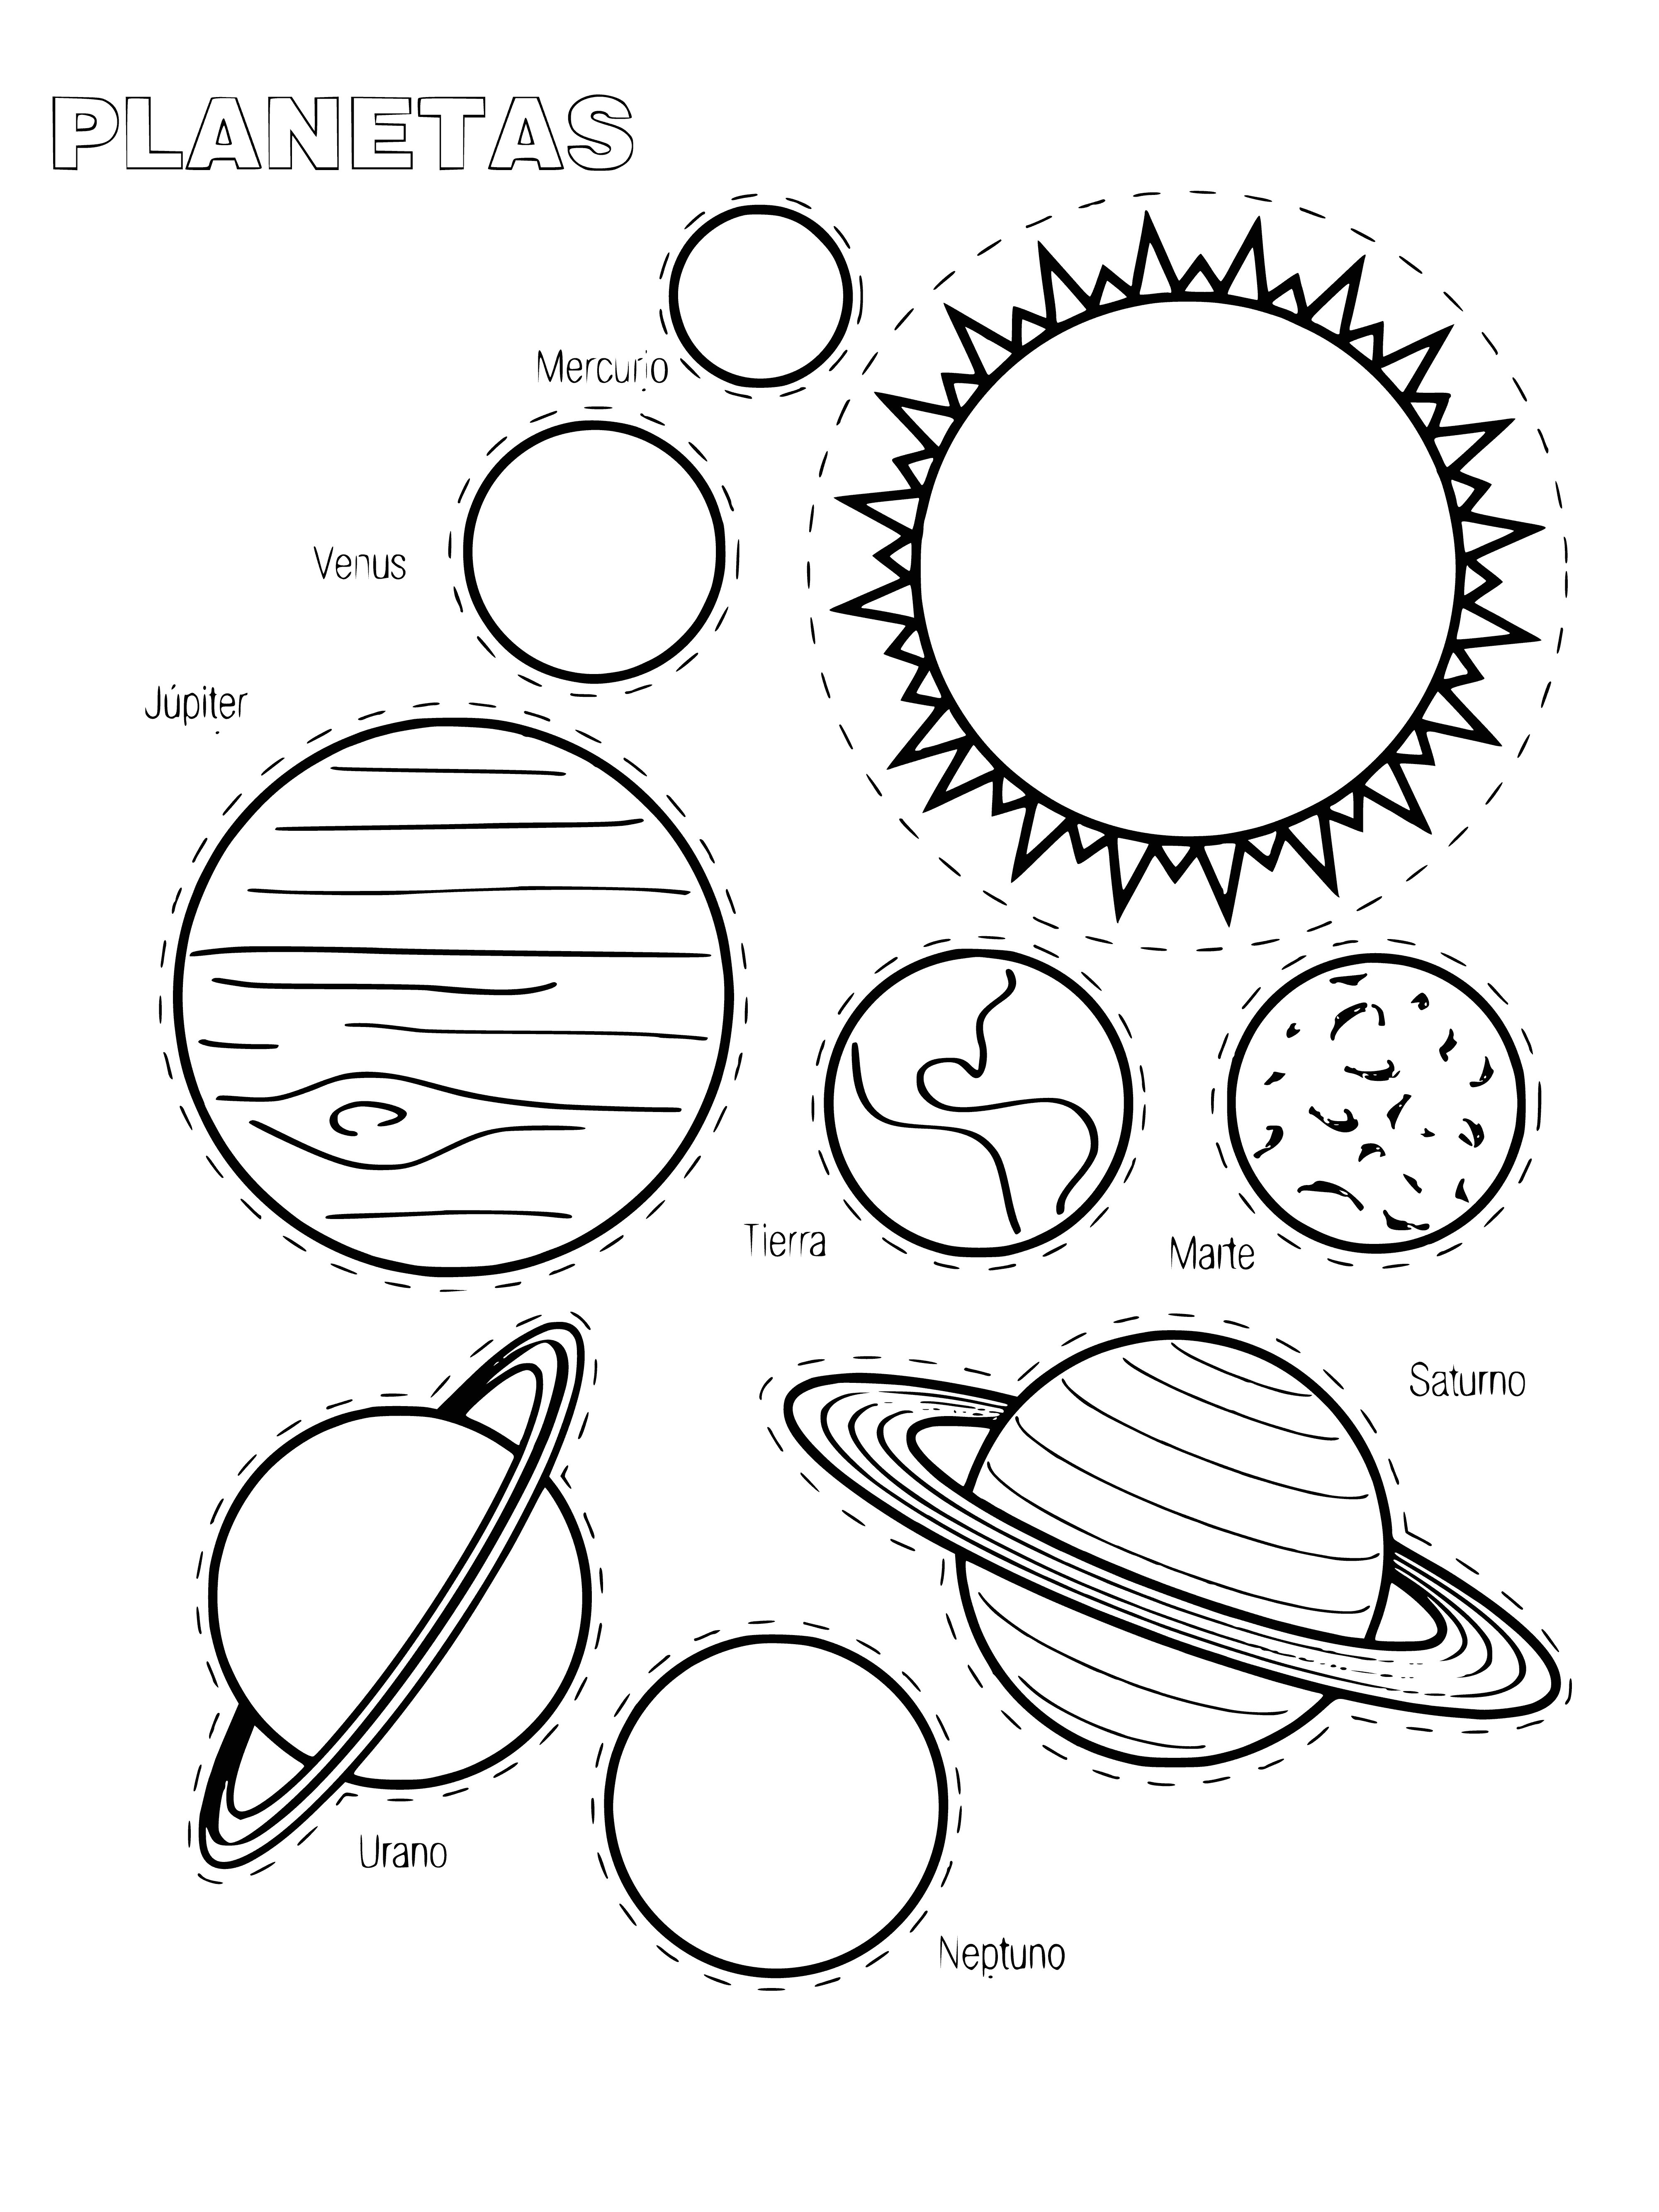 The planets of the solar system coloring page